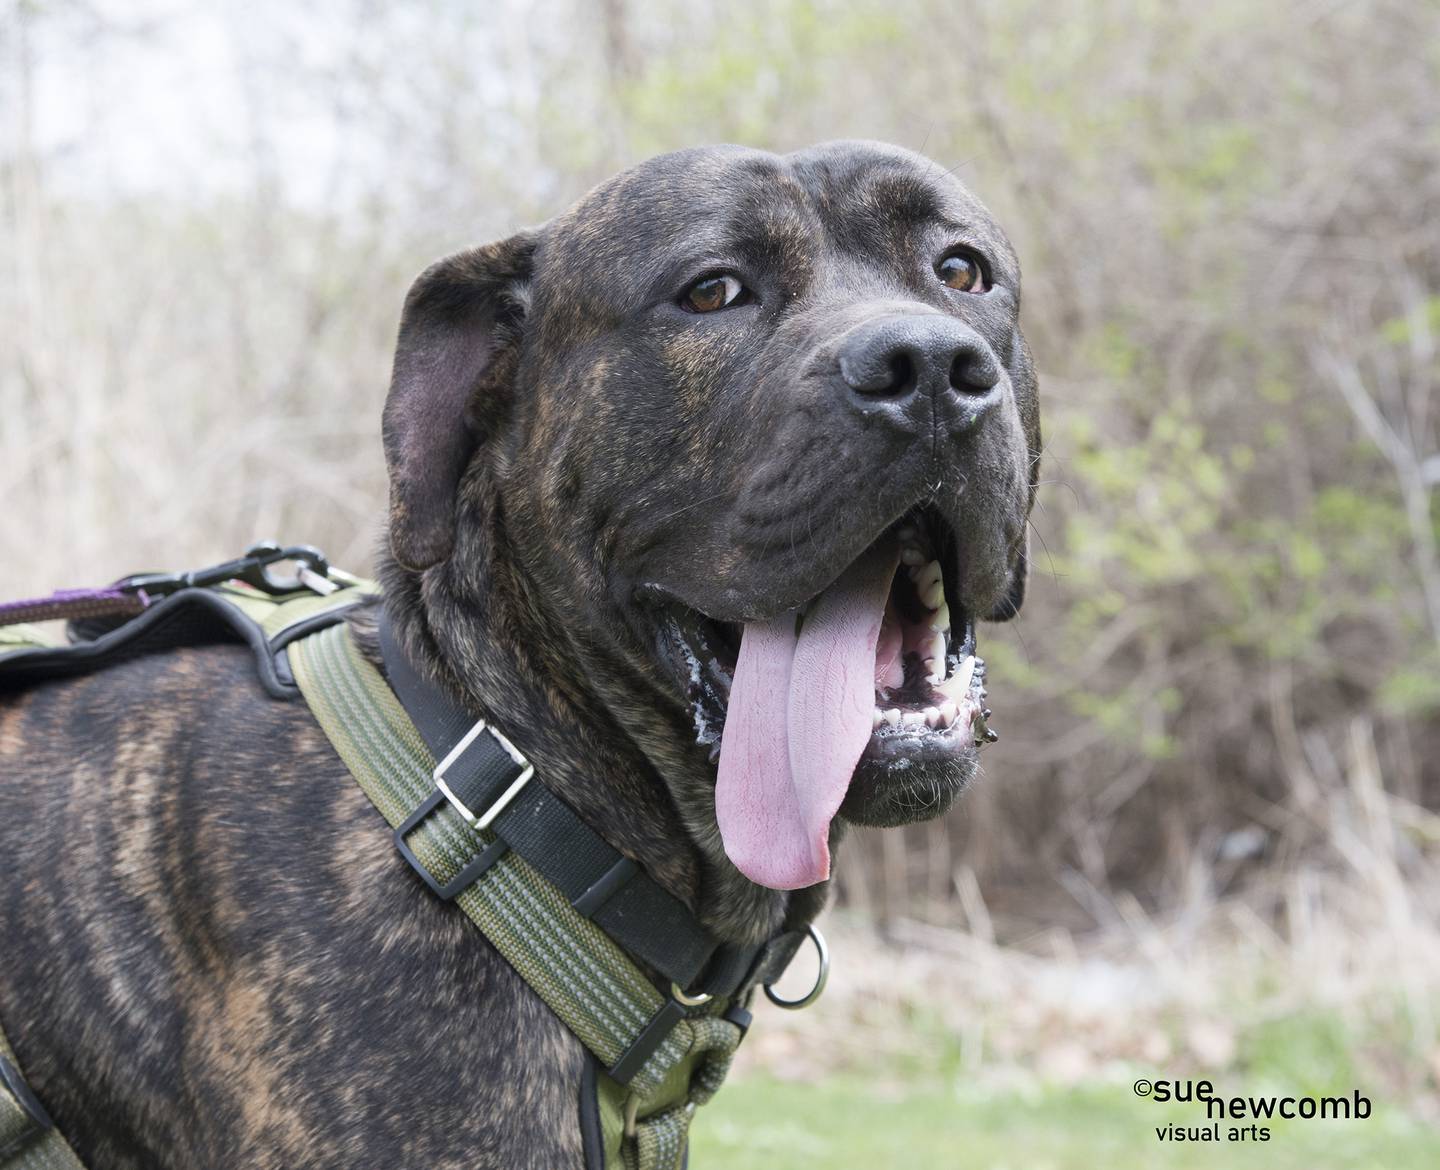 Dude is a large mastiff/cane corso mix who was found in a forest preserve. He is sweet and playful, and very strong. Dude needs a confident owner who will be able to train him to be the best Dude he can be. Contact Will County Humane Society at willcountyhumane.com and follow the instructions for the adoption process.